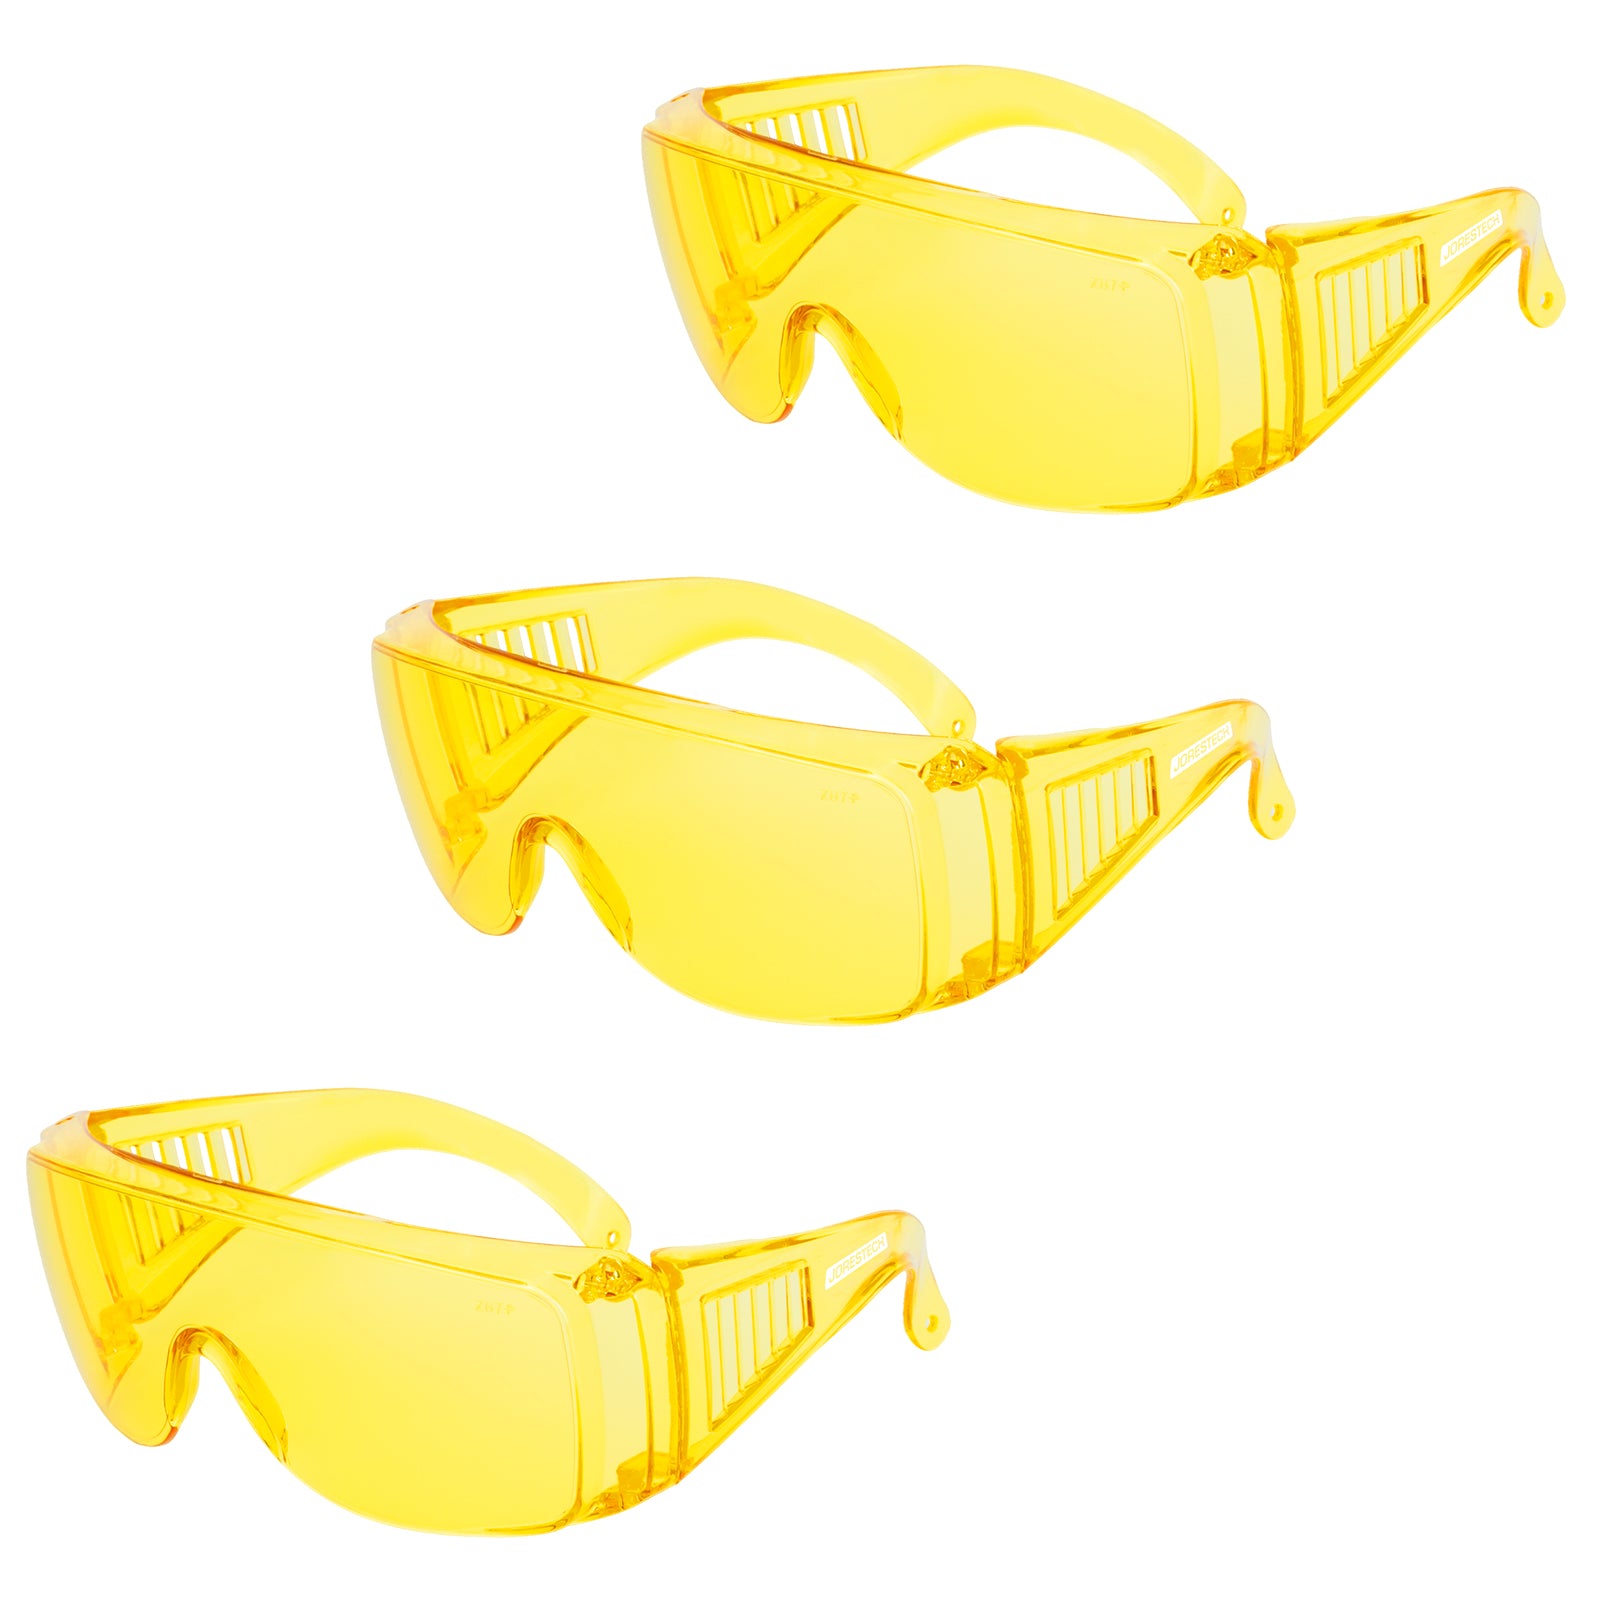 Pack of 3 yellow Jorestech safety over glasses for high impact protection on a white background